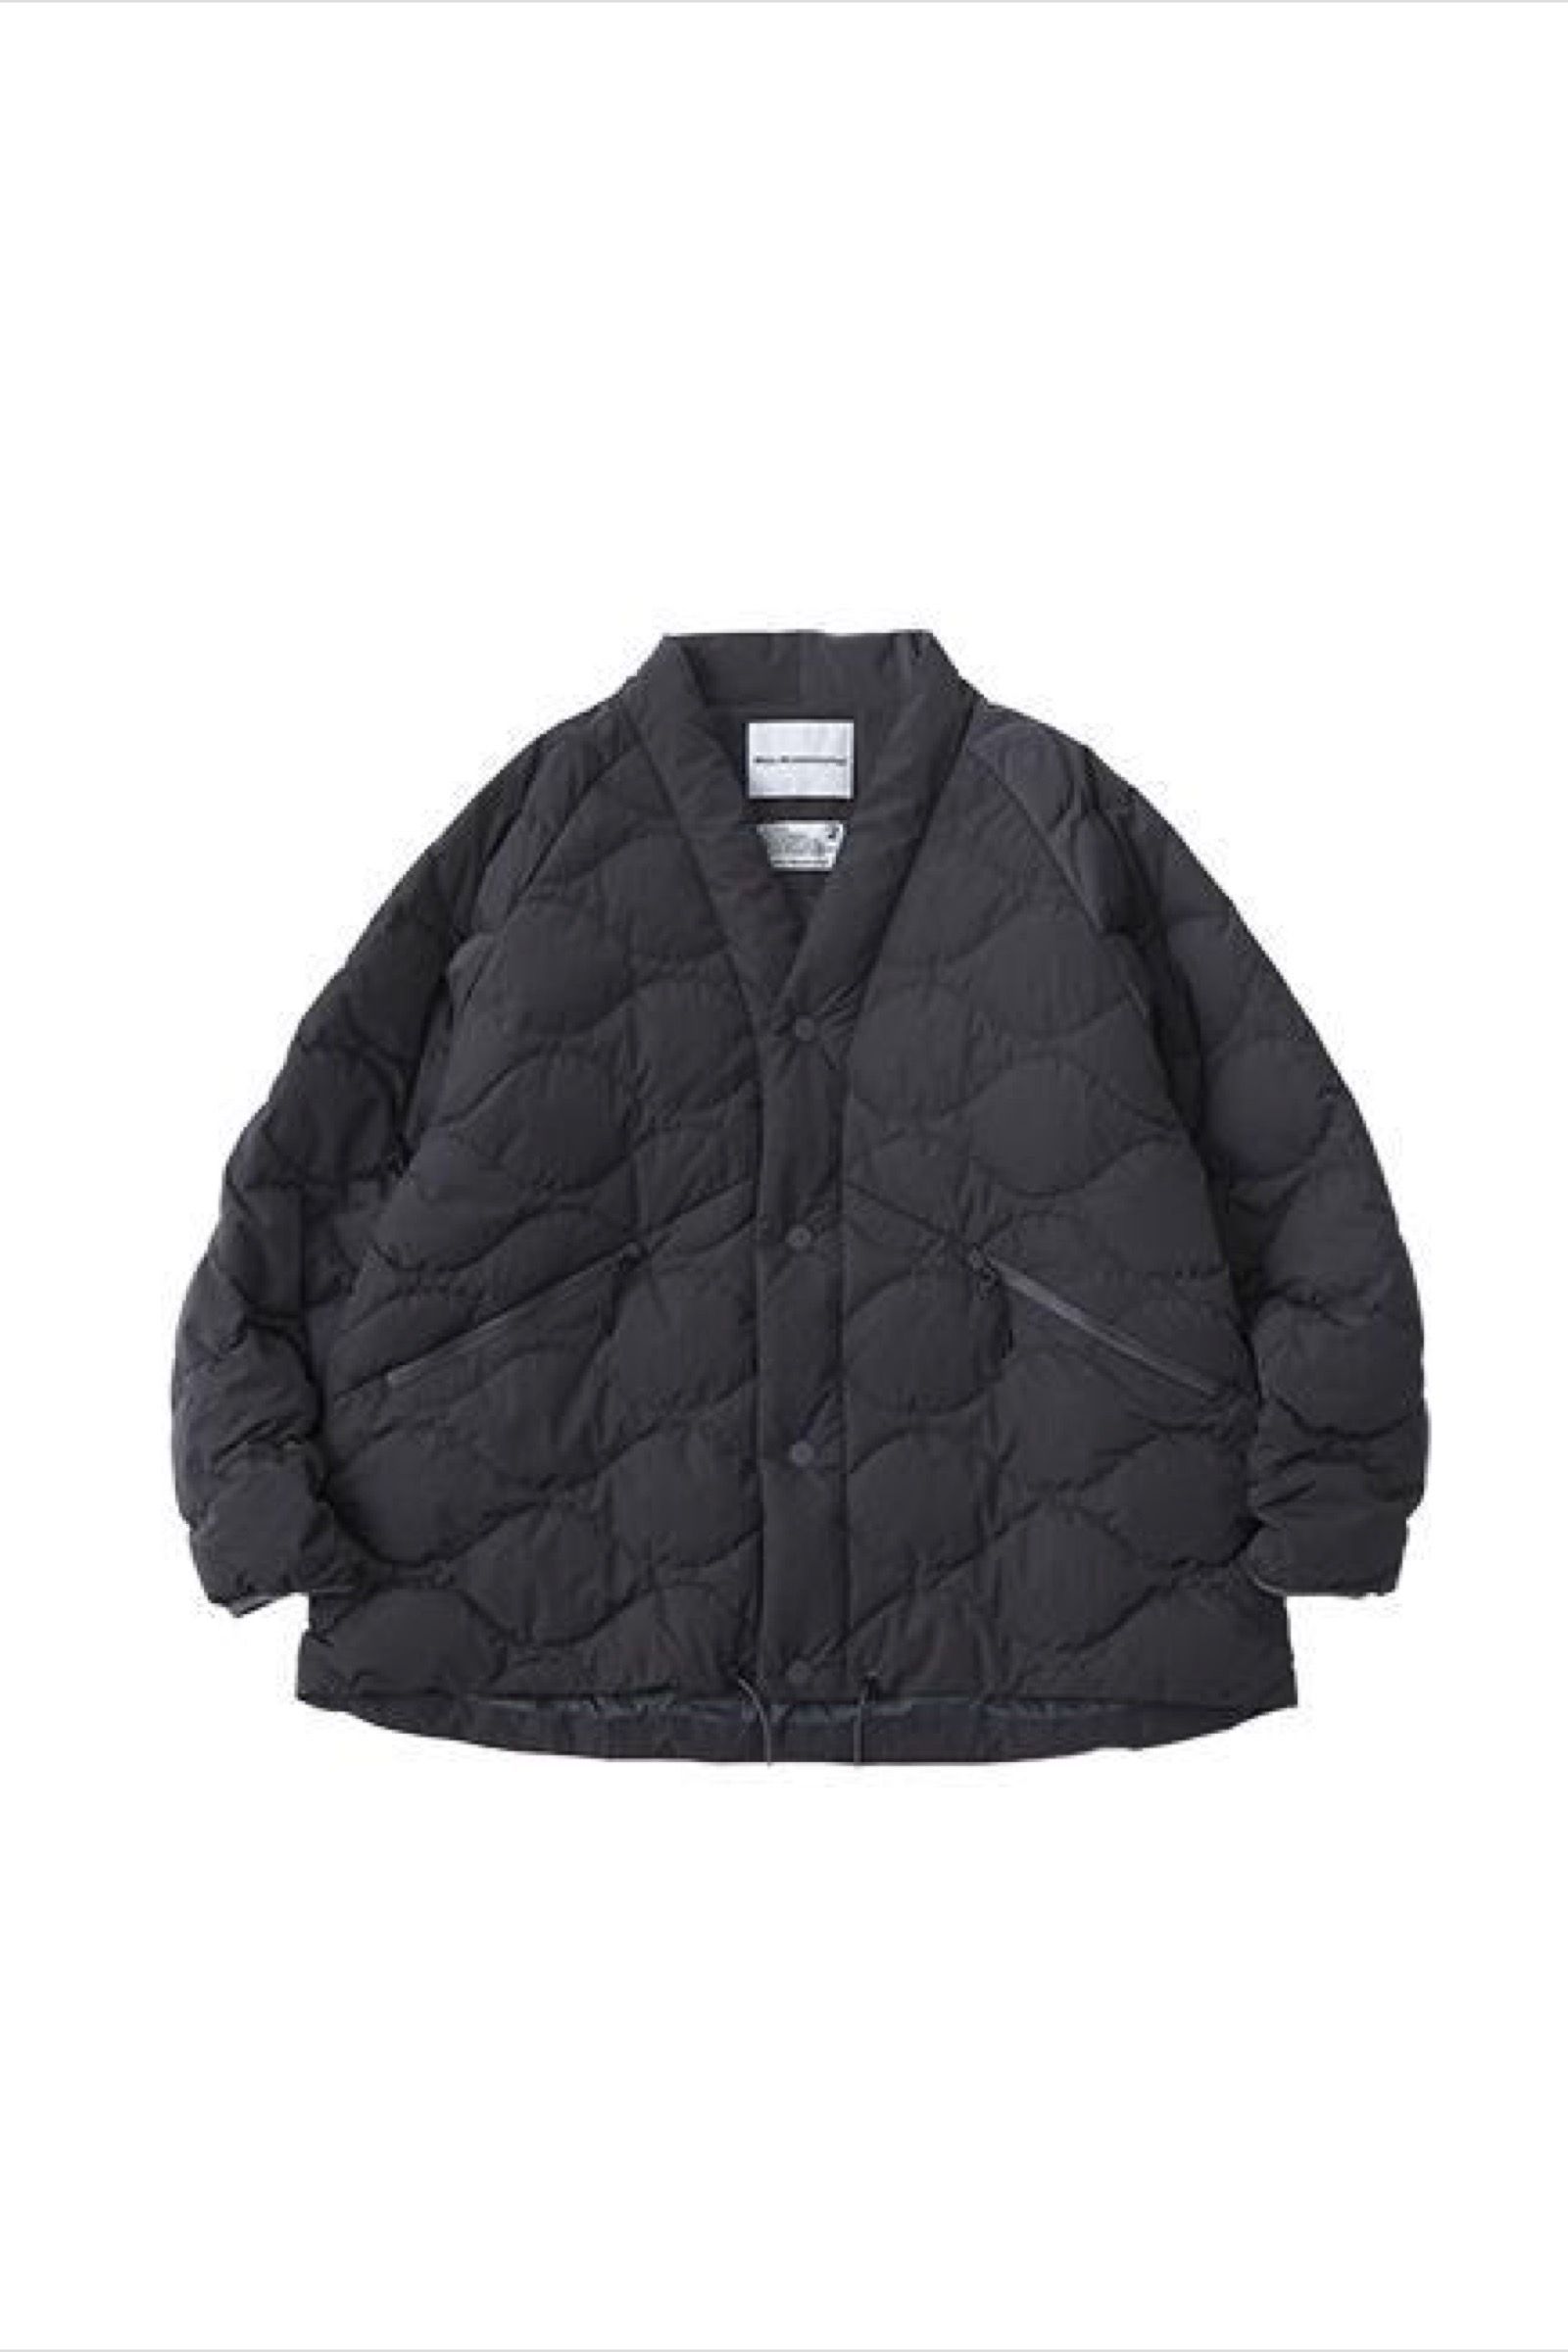 wm × taion quilted hanten -charcoal- 22aw - 2